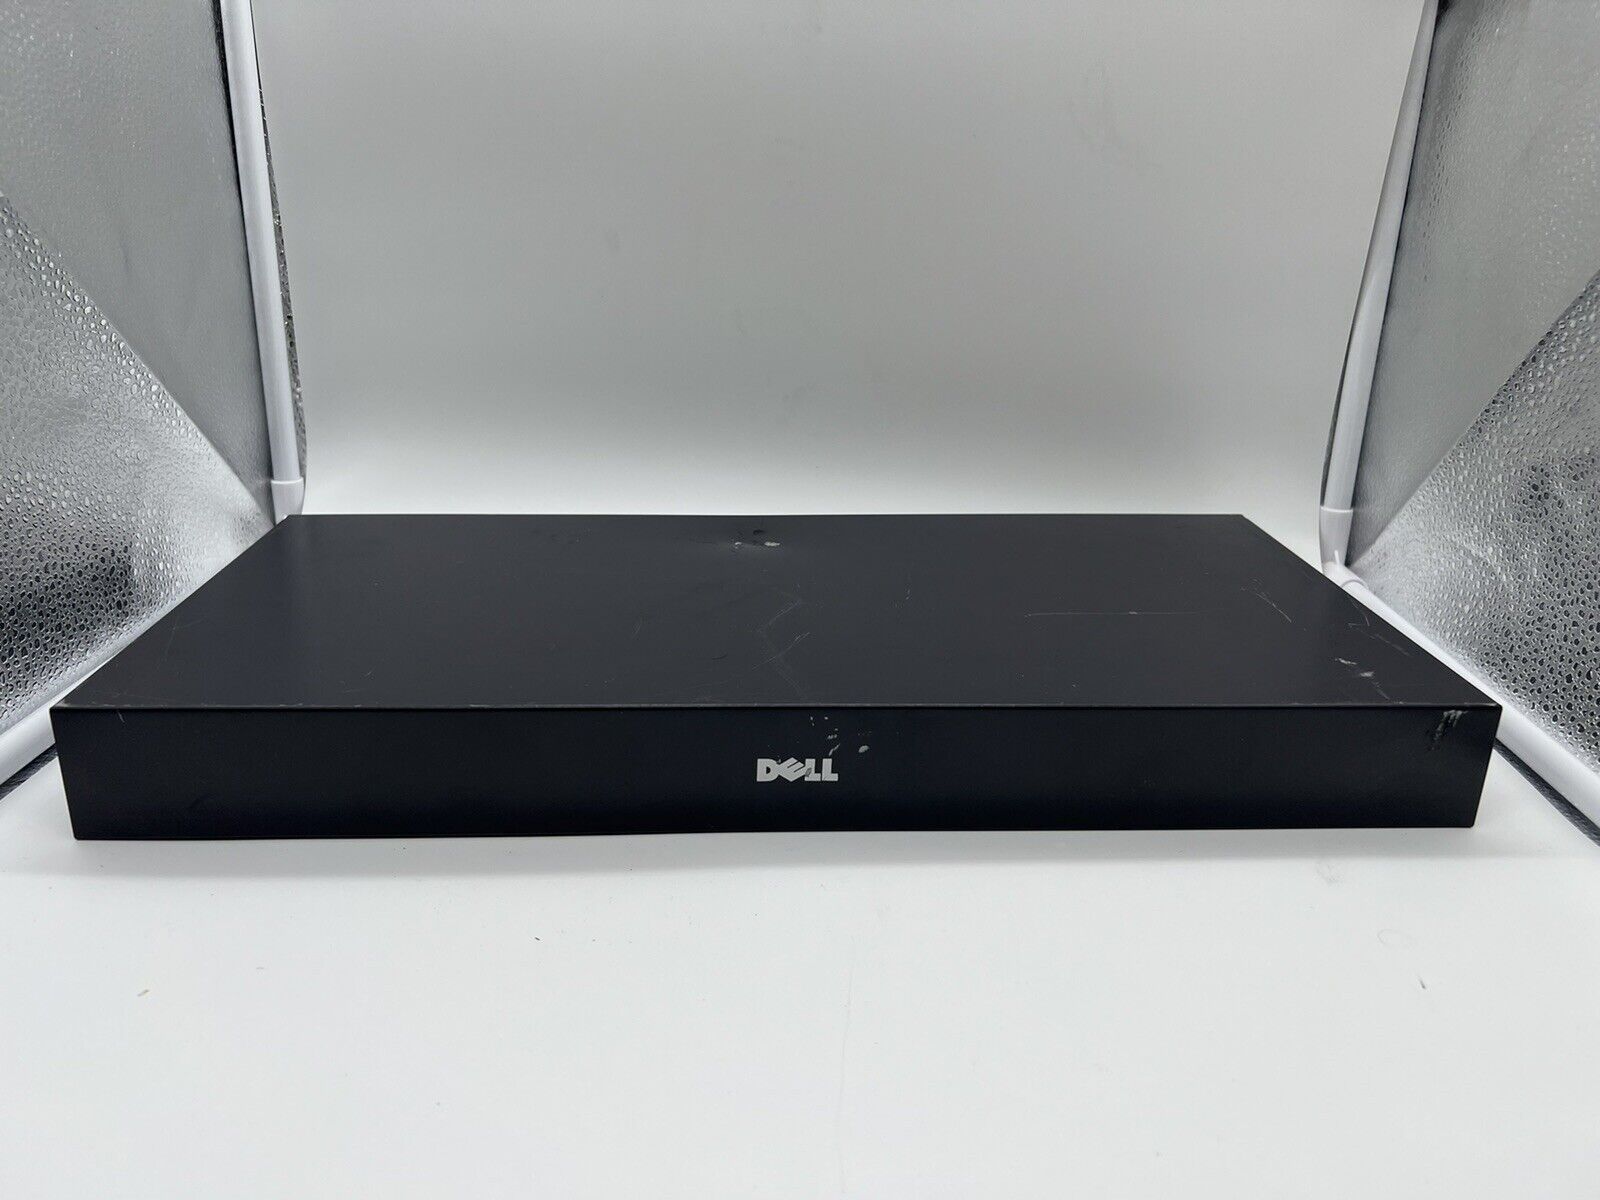 DELL 71PXP 023EEH 8-PORT PS/2 KVM SWITCH W/ RACK MOUNTING BRACKETS